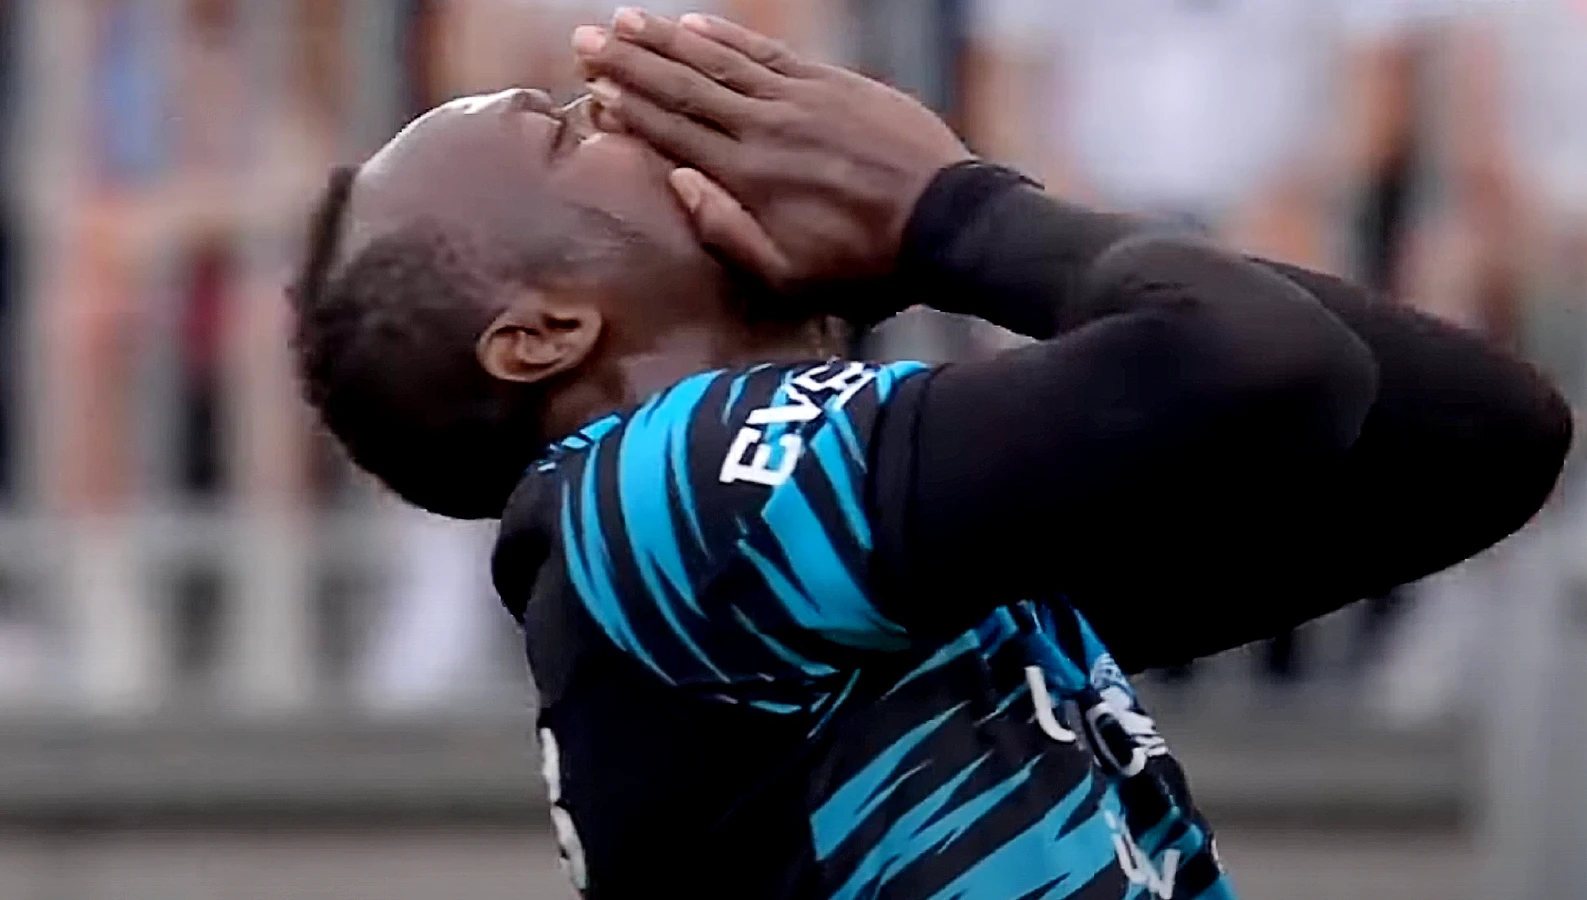 Highlights: World record holder Usain Bolt featured in charity football game for World XI